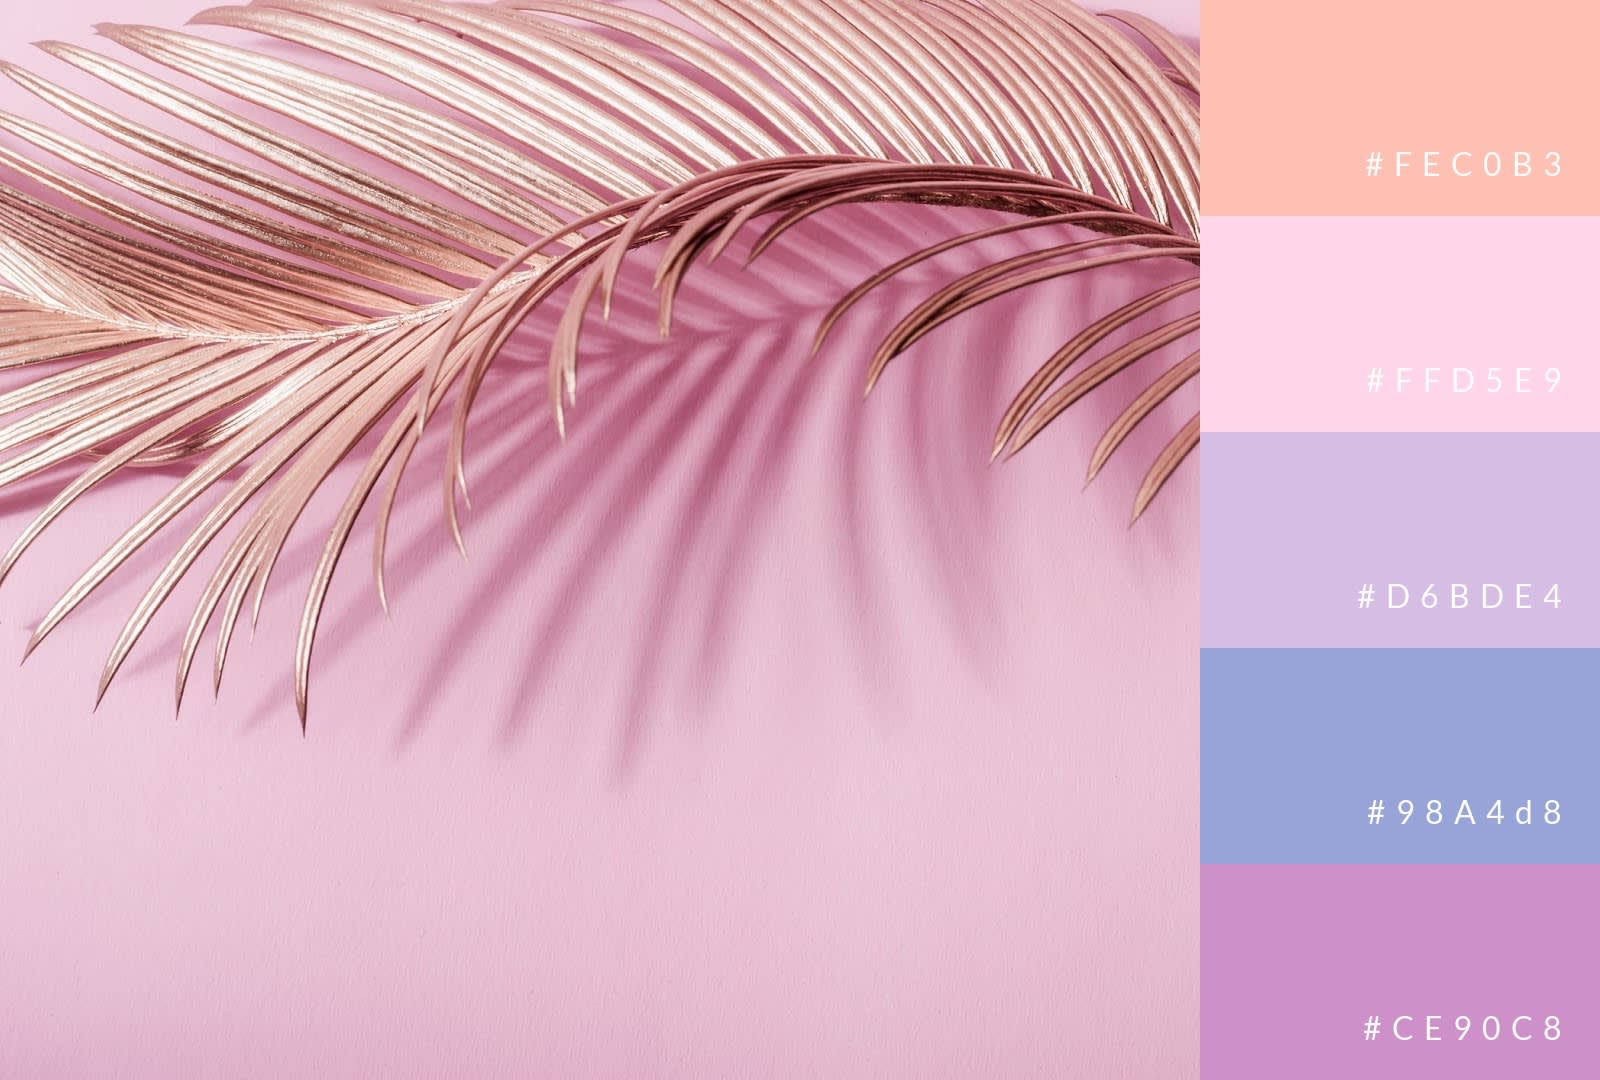 Why We Love the Pastel Color Palette